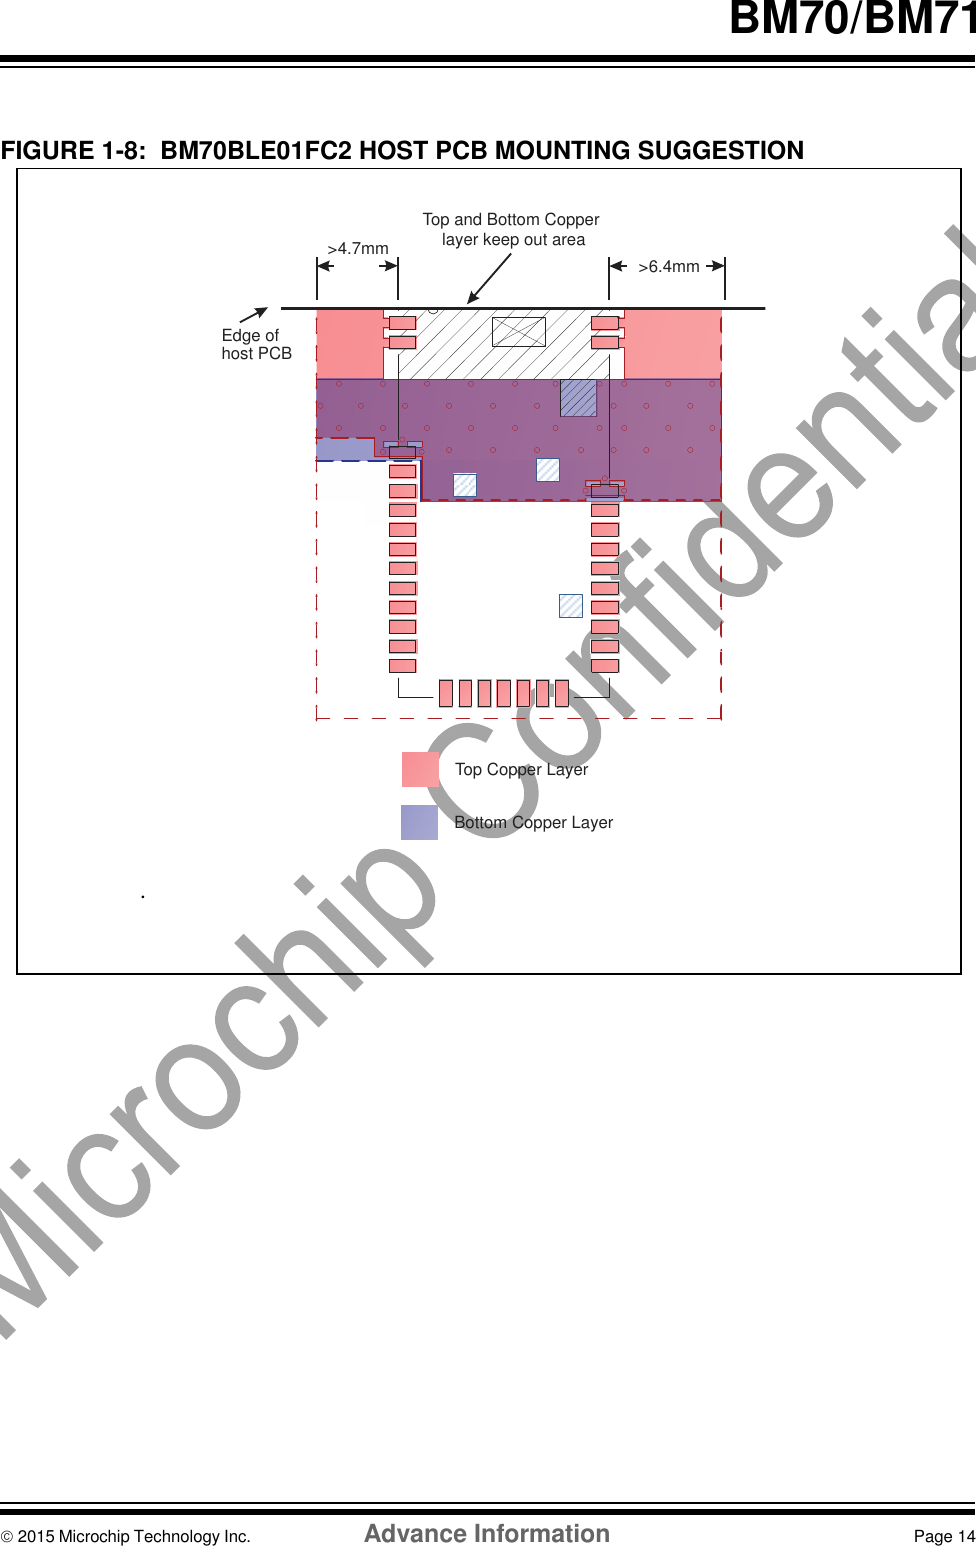    BM70/BM71   FIGURE 1-8:  BM70BLE01FC2 HOST PCB MOUNTING SUGGESTION Top and Bottom Copper layer keep out areaTop Copper LayerBottom Copper Layer&gt;6.4mm&gt;4.7mmEdge ofhost PCB .                     2015 Microchip Technology Inc.  Advance Information  Page 14